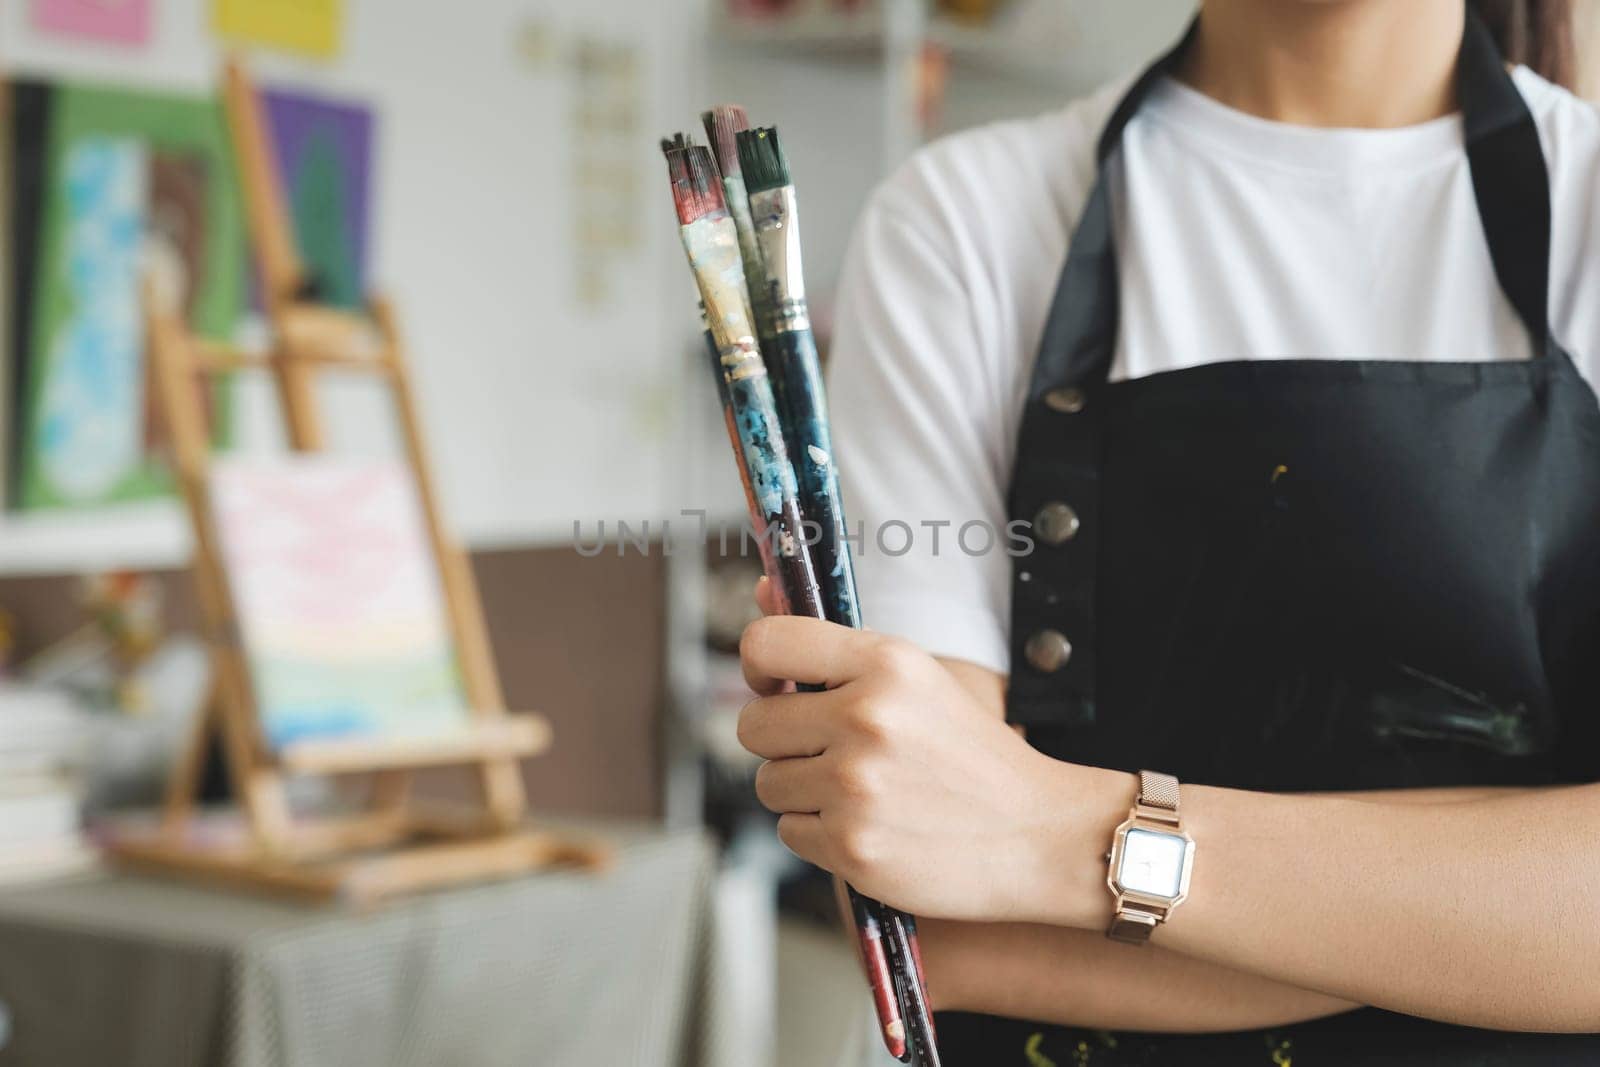 A close-up of the artist hands wearing an apron smeared with paint. Clutching many brushes and paintbrushes. by ijeab